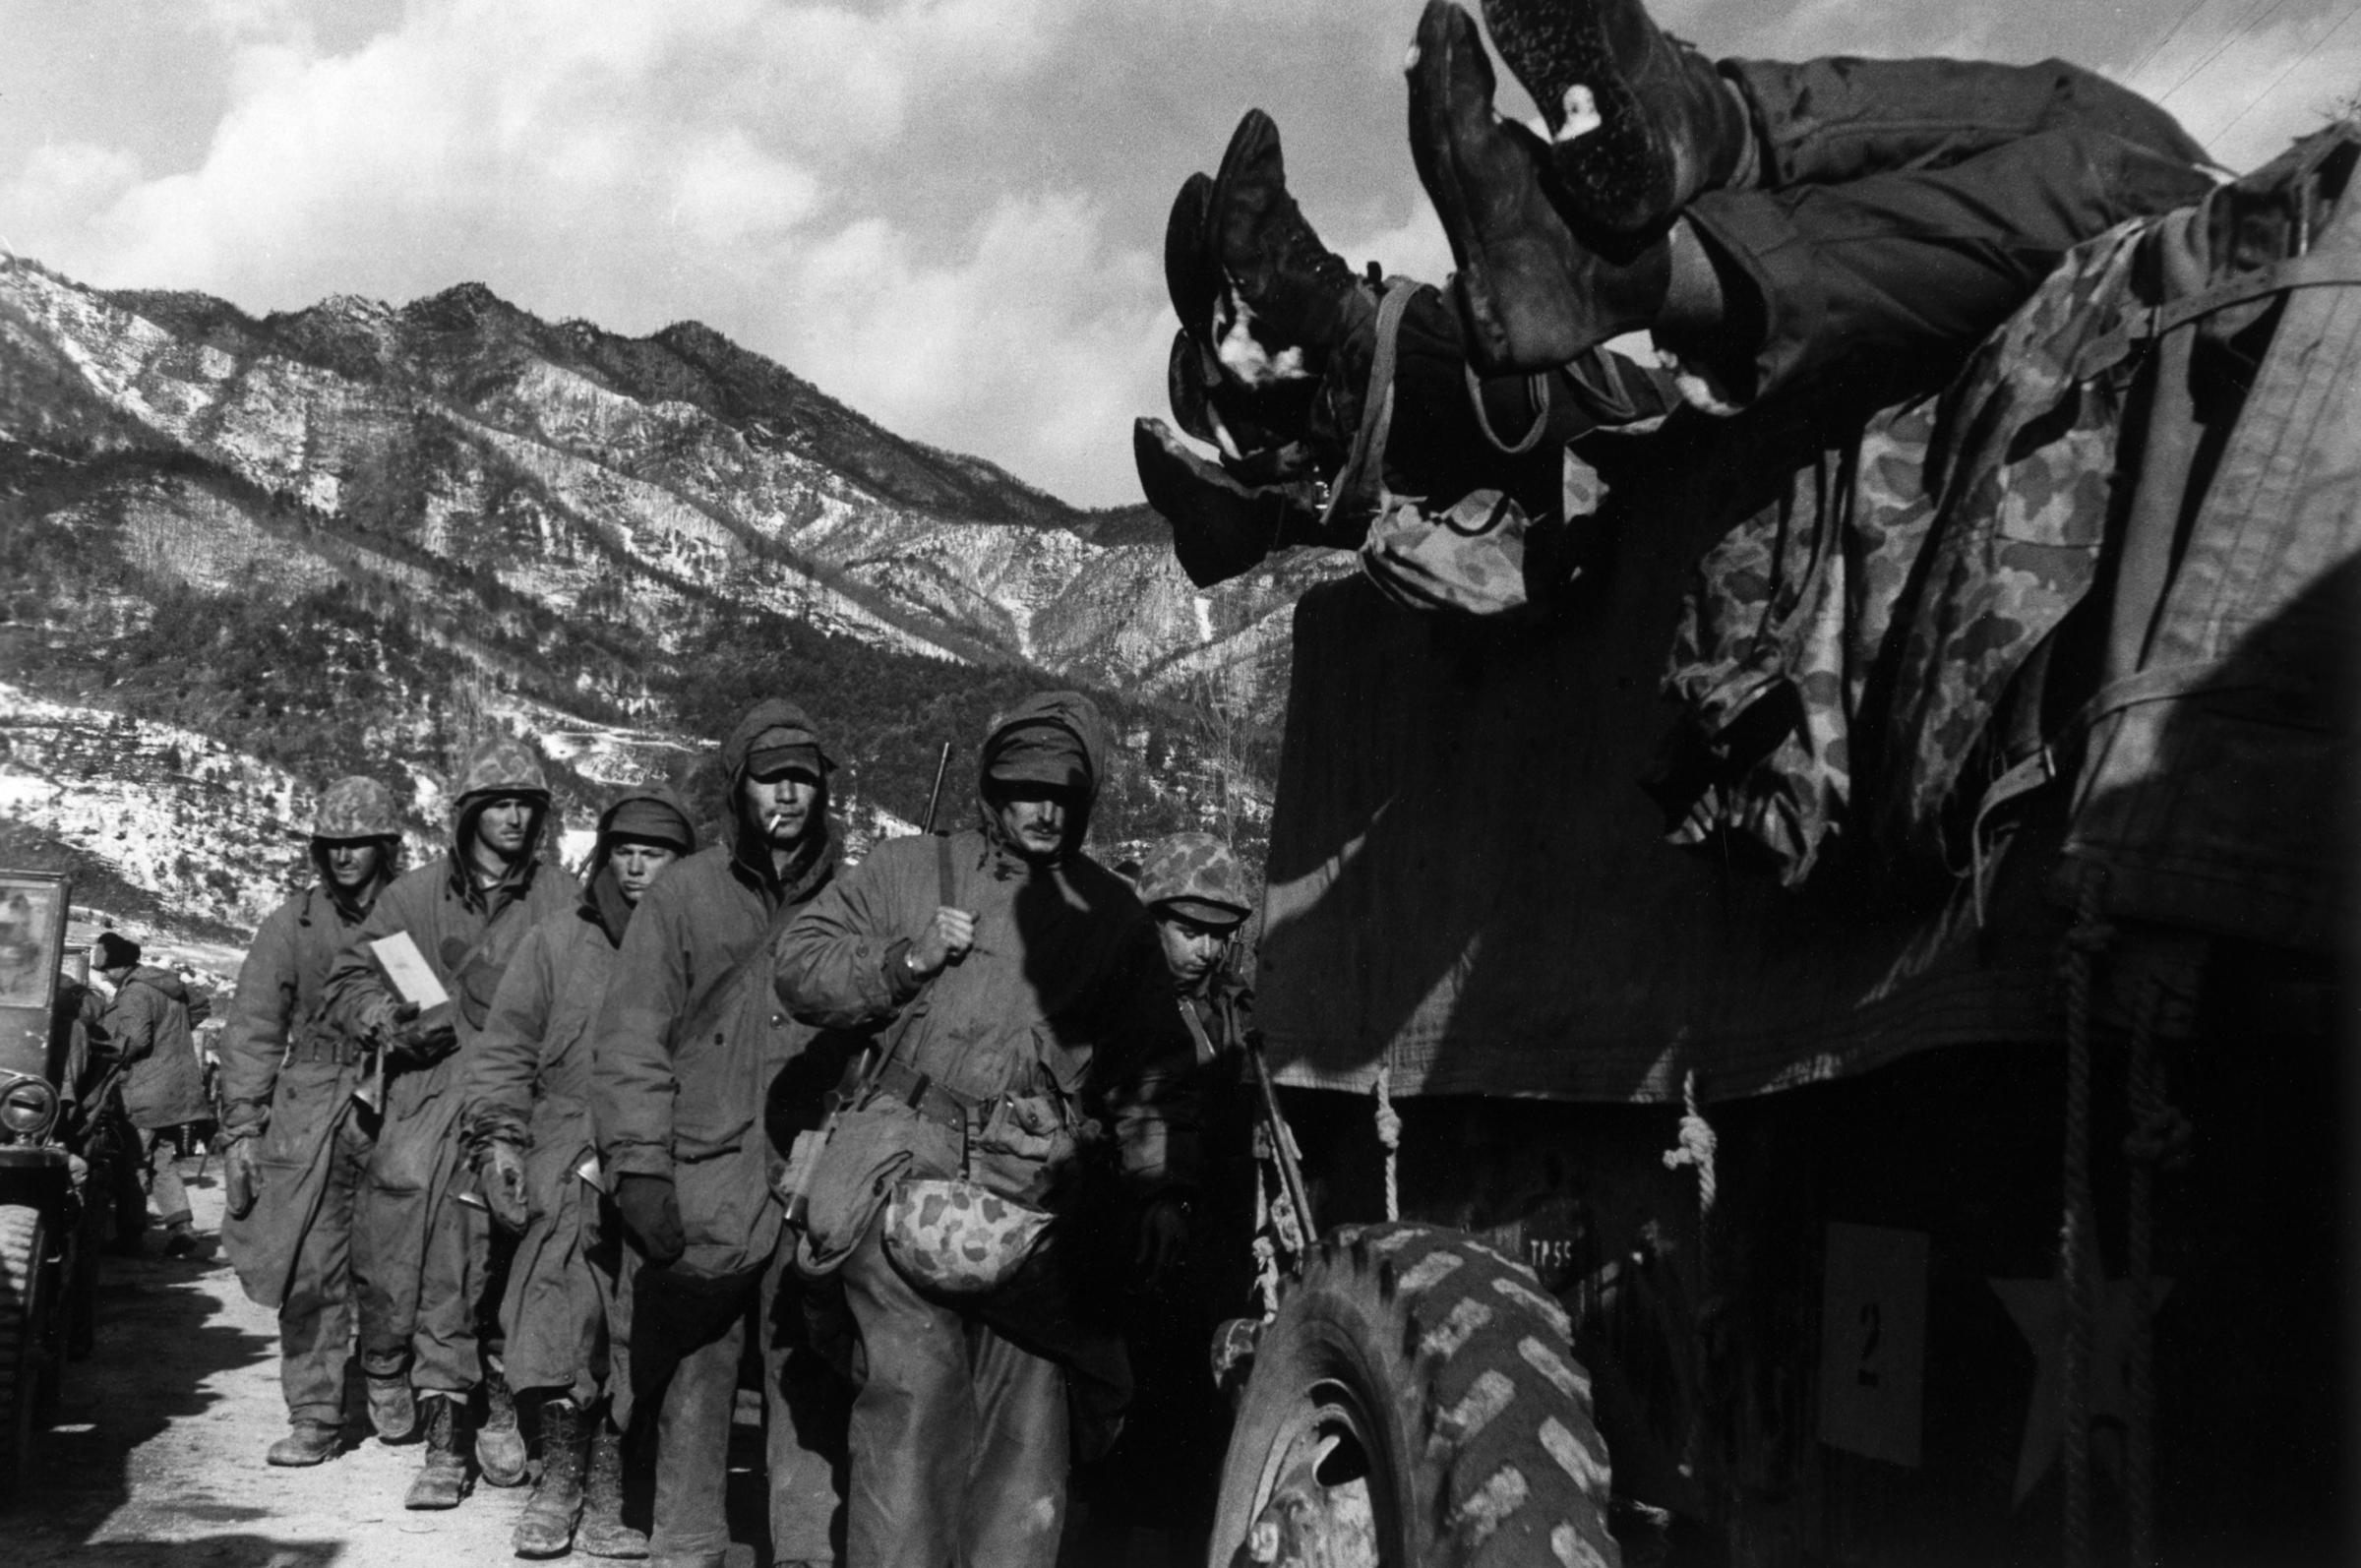 Marines file past a truck loaded with dead troops during the retreat from the Chosin Reservoir, December 1950.